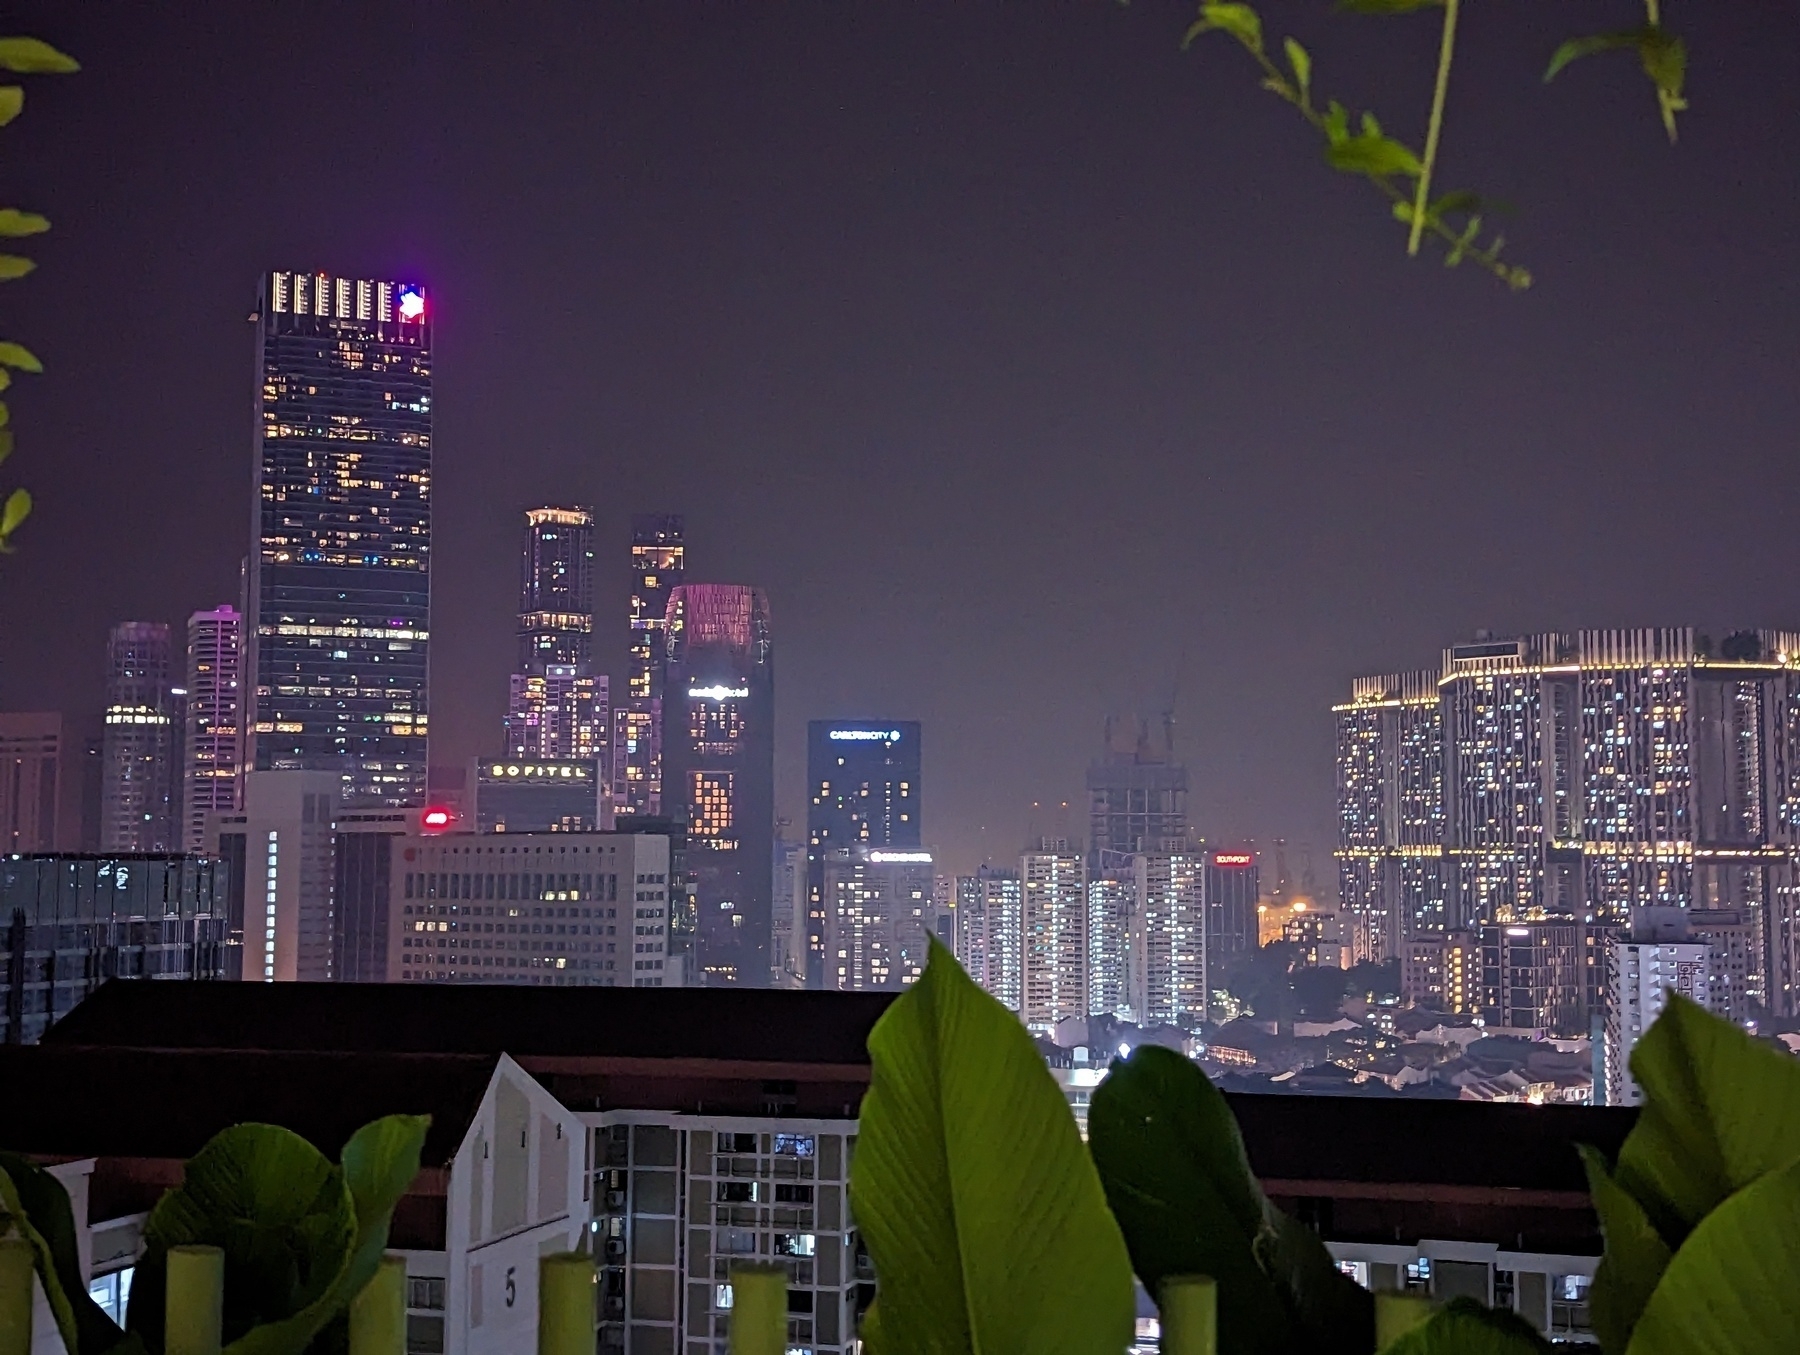 Singapore skyline at night with some plants slightly covering the foreground.